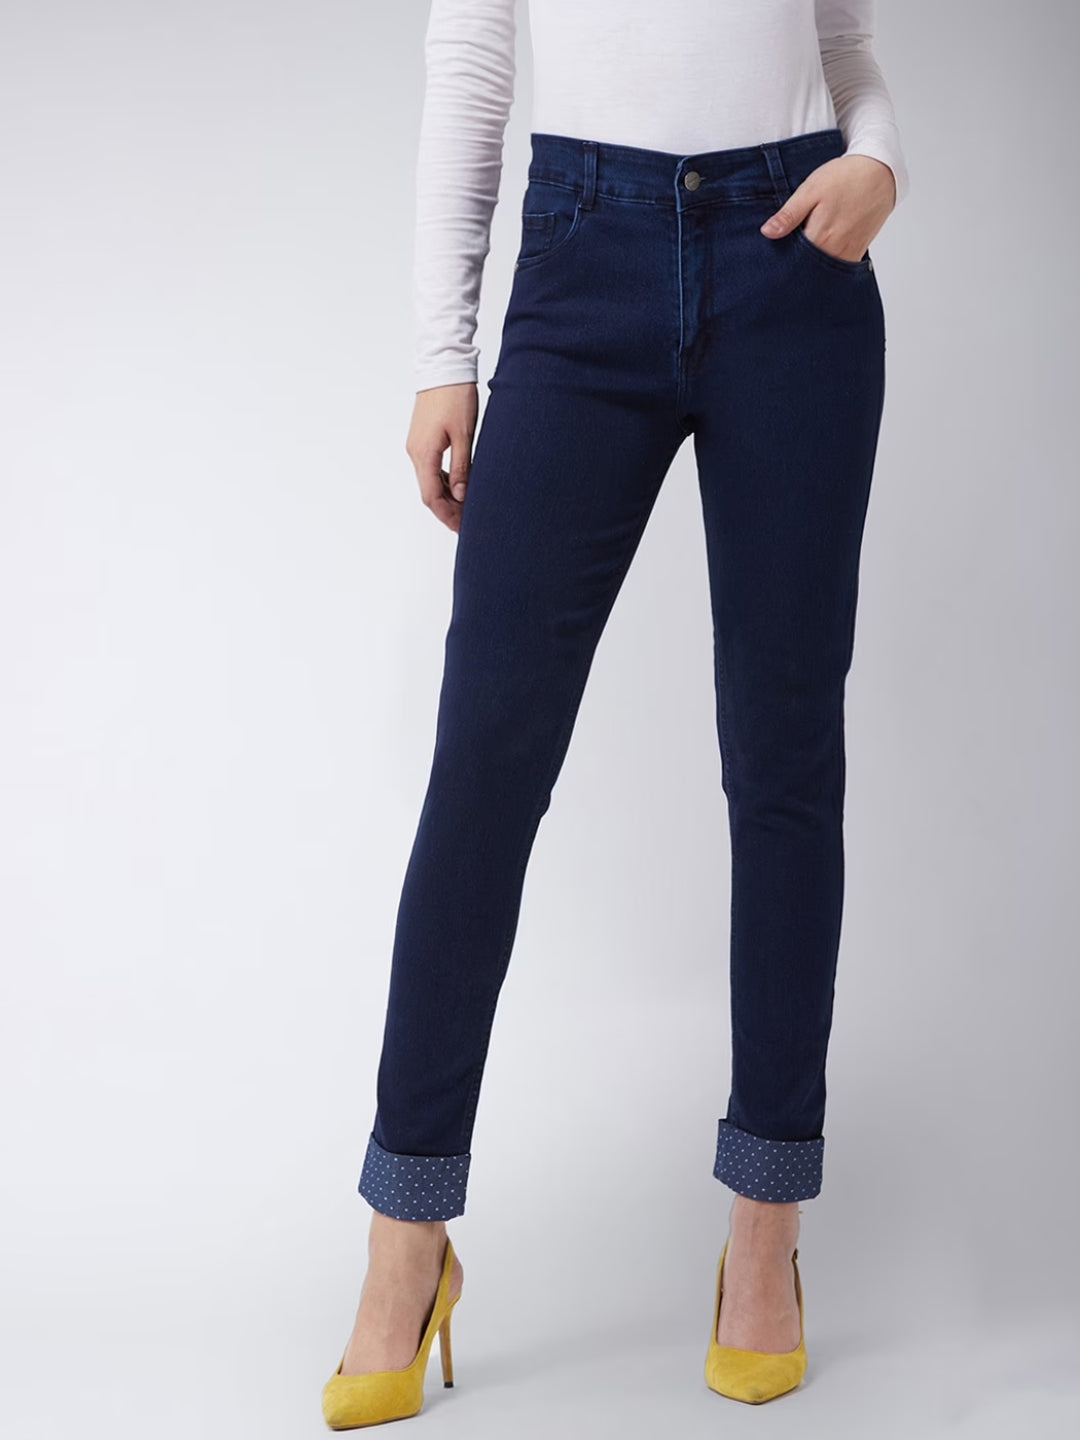 Navy Blue Skinny Fit Mid Rise Cropped Printed Turner Detailing Length Denim Stretchable Jeans